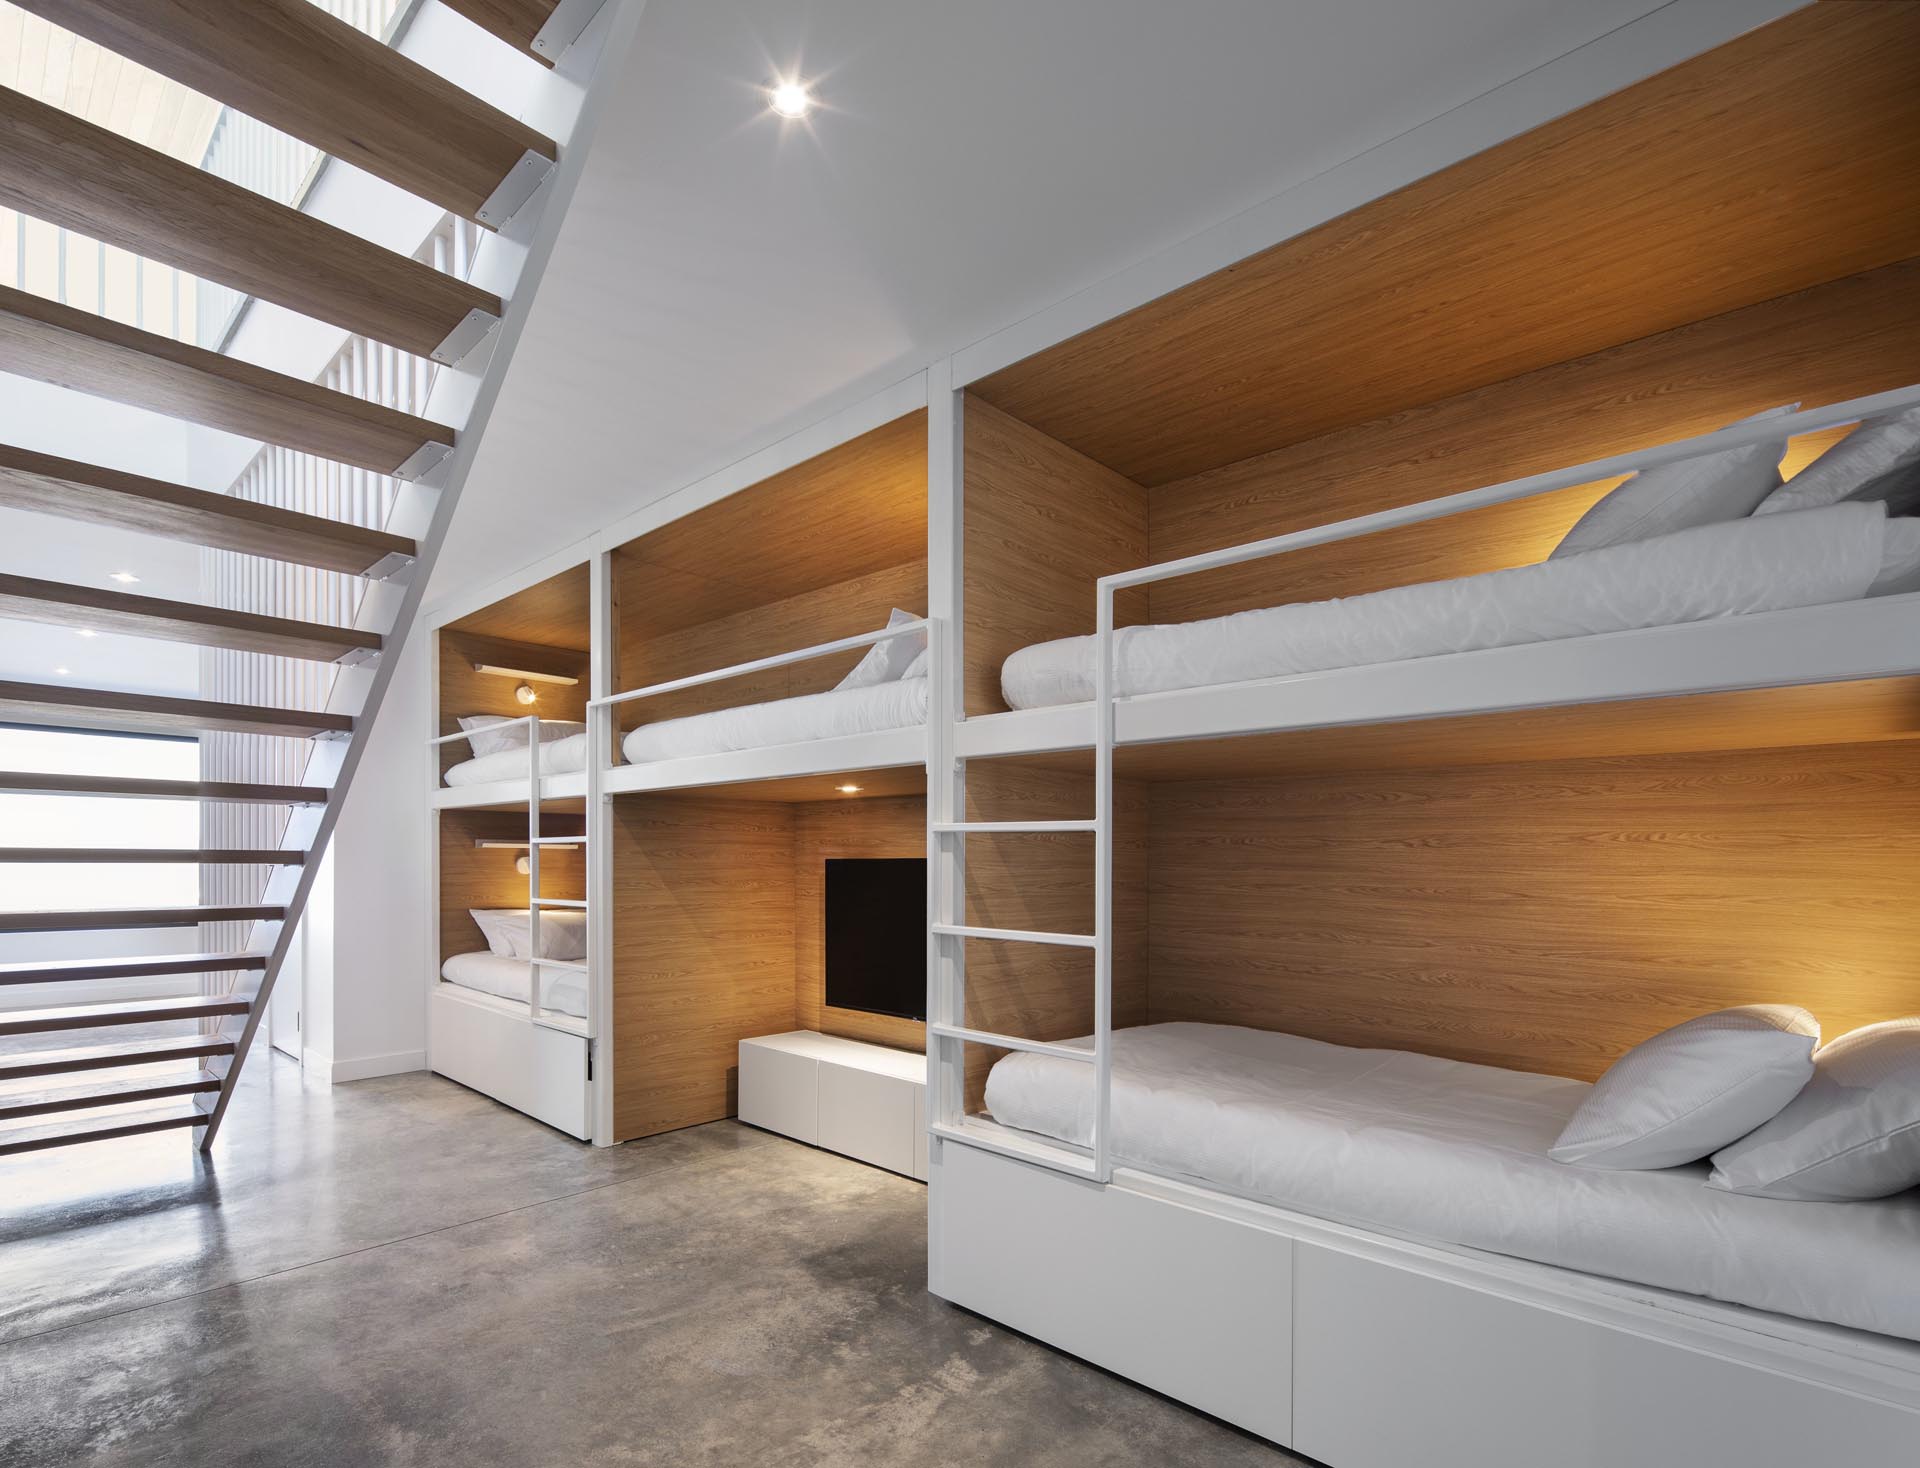 At the bottom of these modern stairs stairs and open to the hallway, are multiple sets of bunk beds. These bunk beds have a wood interior, with white suppers and ladders that match the walls.